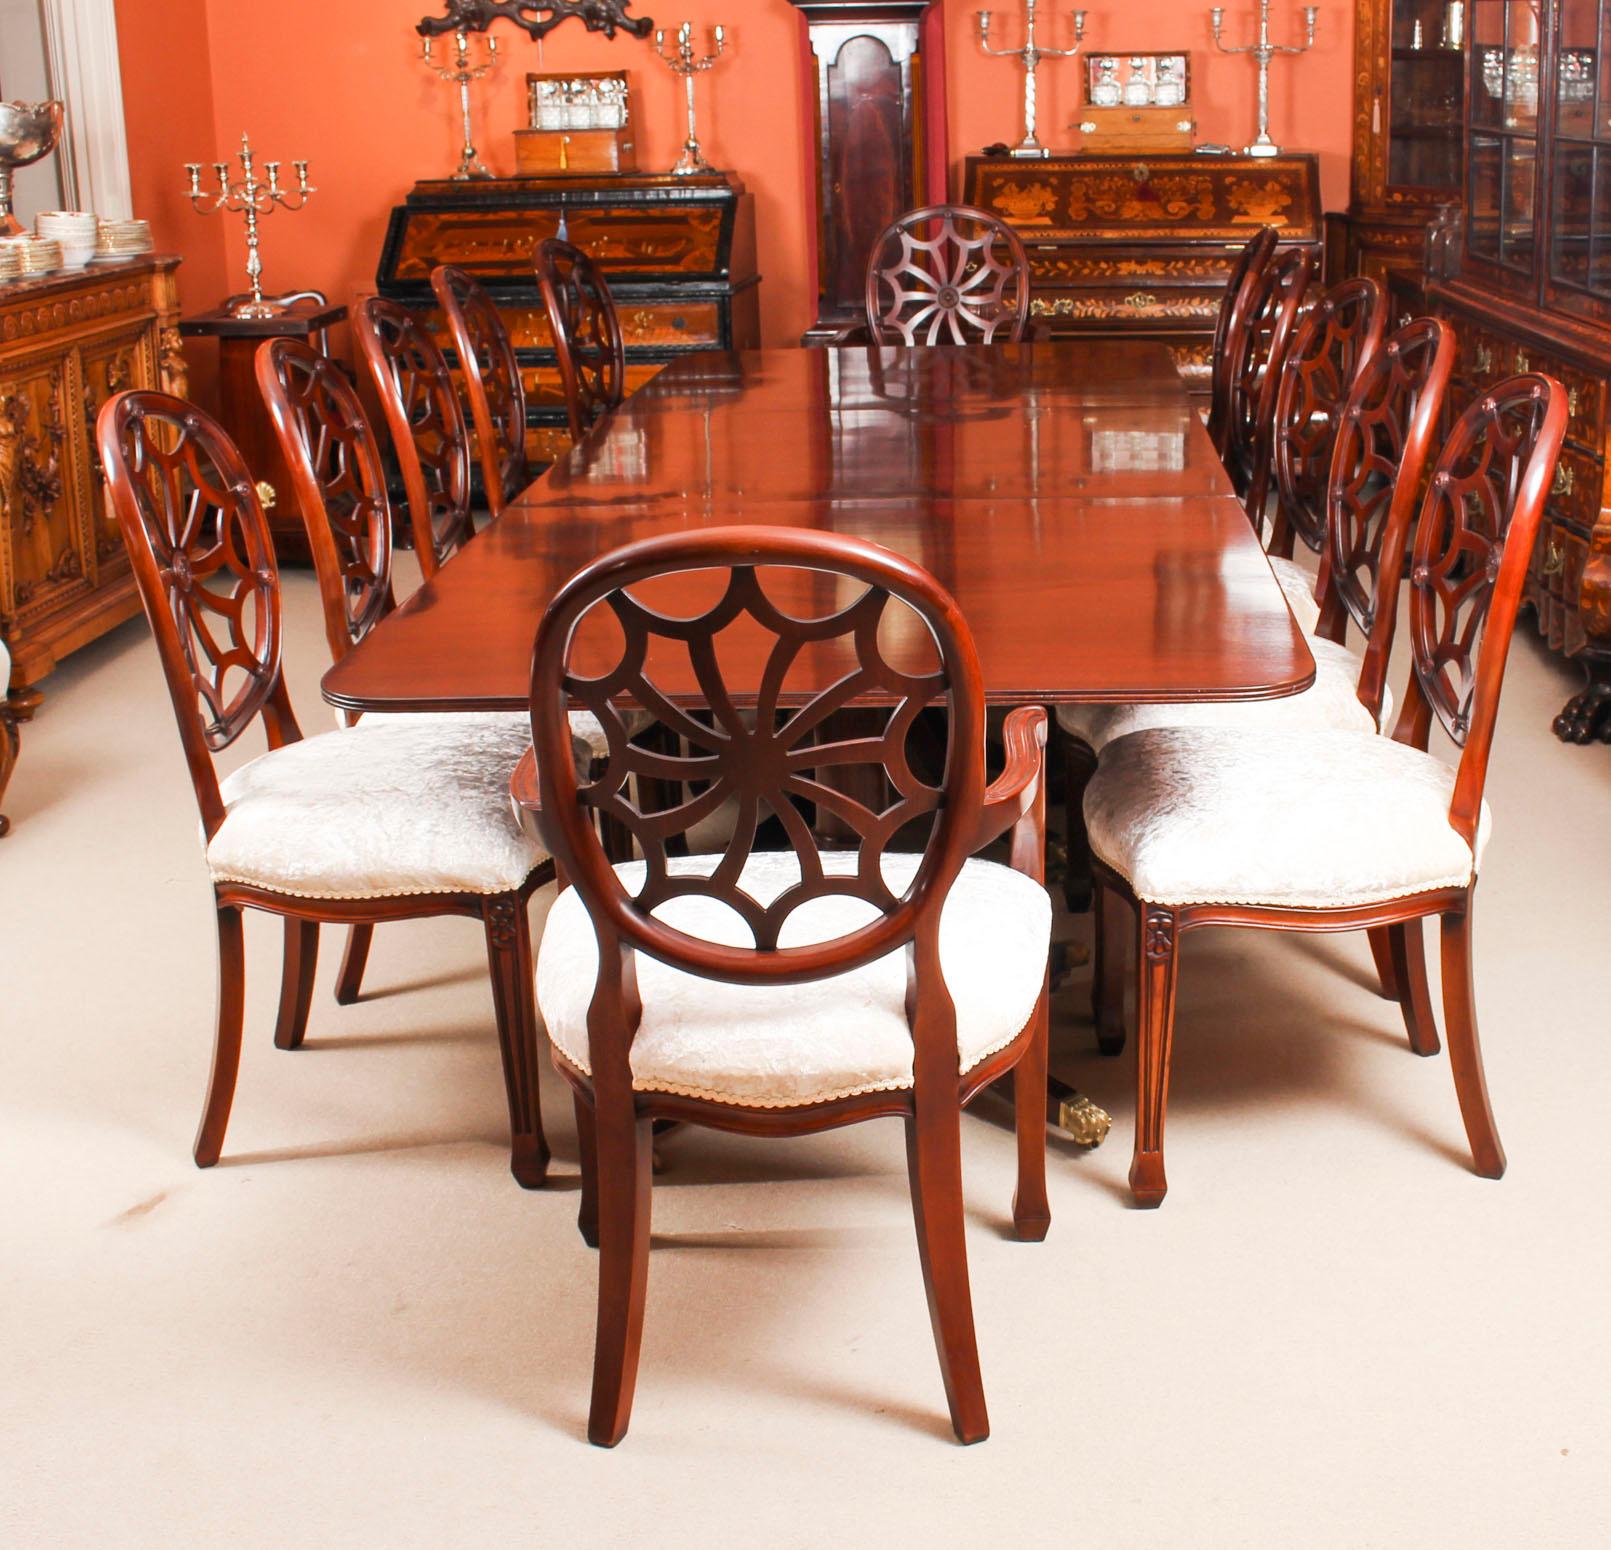 This is a fantastic high quality dining set comprising an antique flame mahogany Regency Revival triple pillar dining table circa 1900 in date and a bespoke set of twelve Spyder back dining chairs

The table is raised on three gunbarrel bases, each